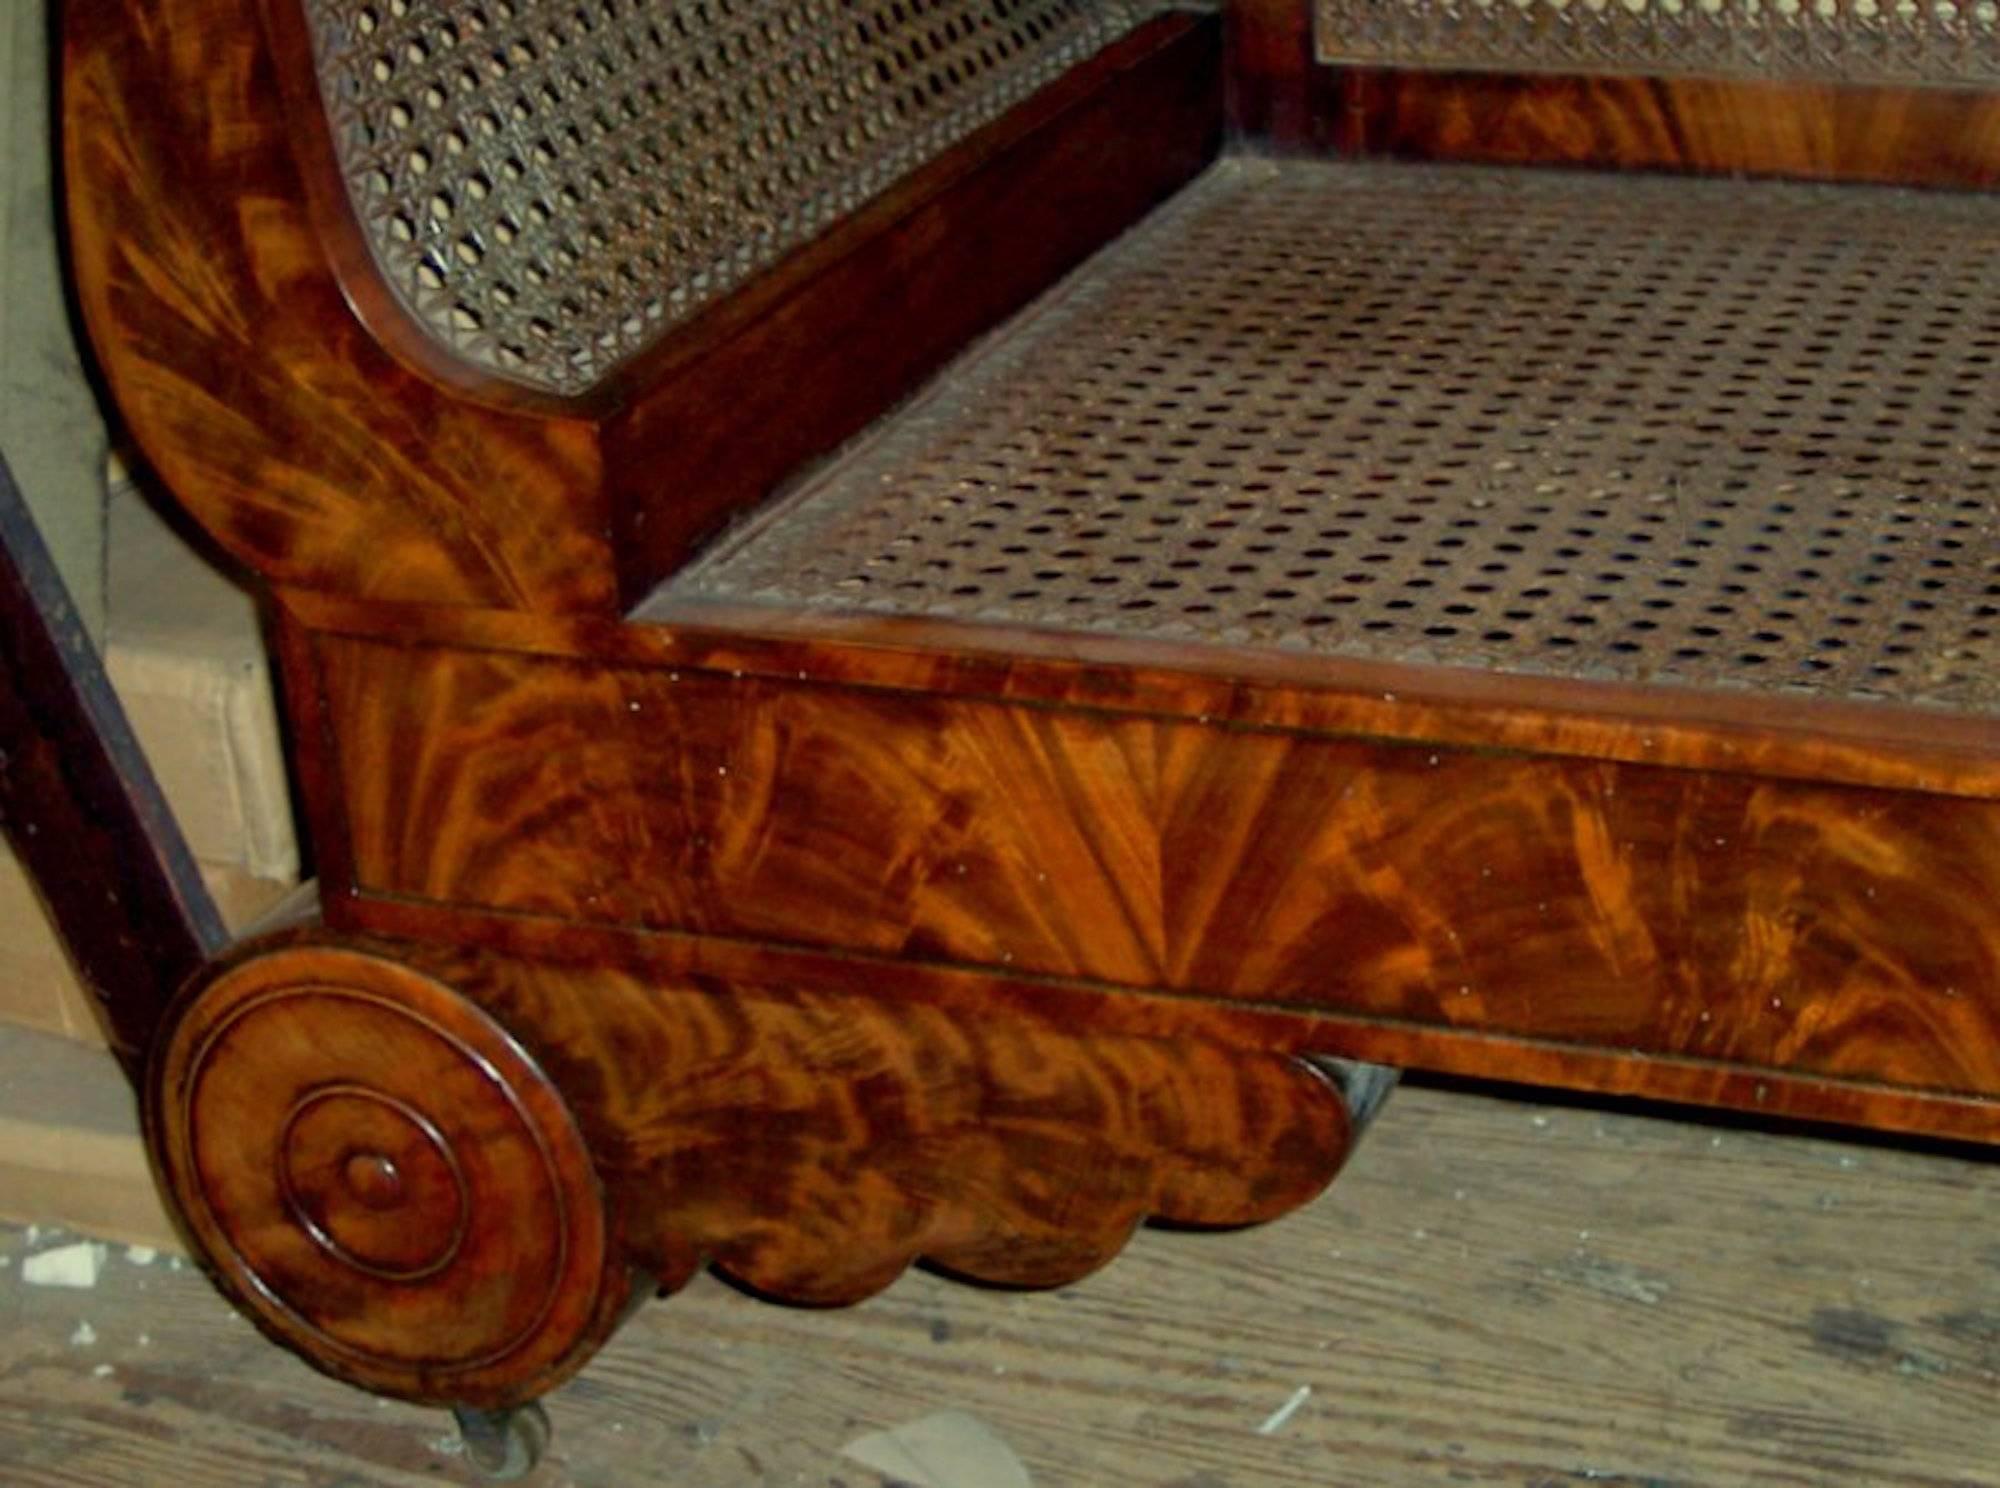 Antique American Flame Mahogany and Cane Empire Period Recamier or Chaise Longue For Sale 4